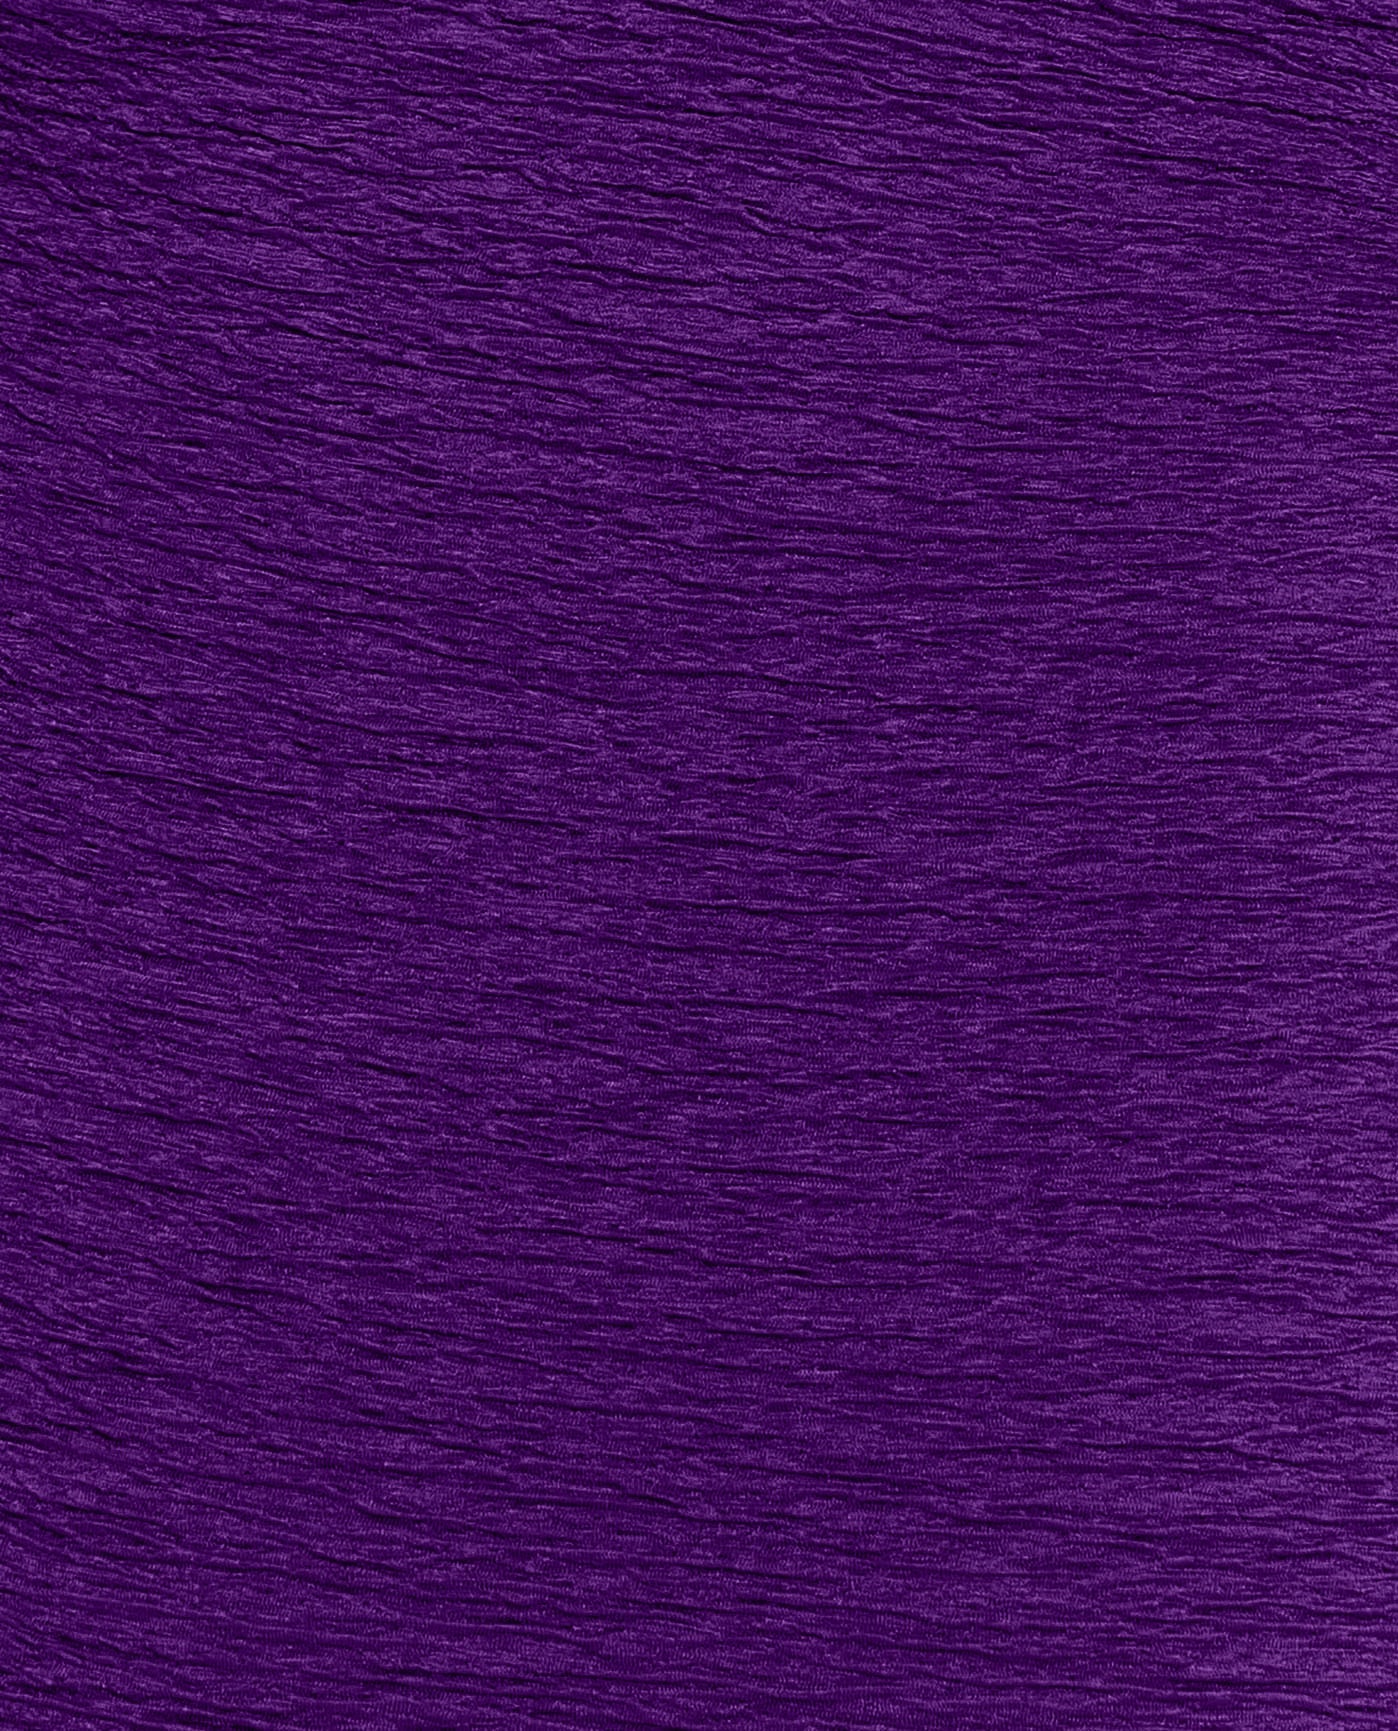 FABRIC SWATCH VIEW OF CHLORINE RESISTANT KRINKLE TEXTURED SOLID EMPIRE MIO LONG TORSO ONE PIECE | KRINKLE ACAI PURPLE